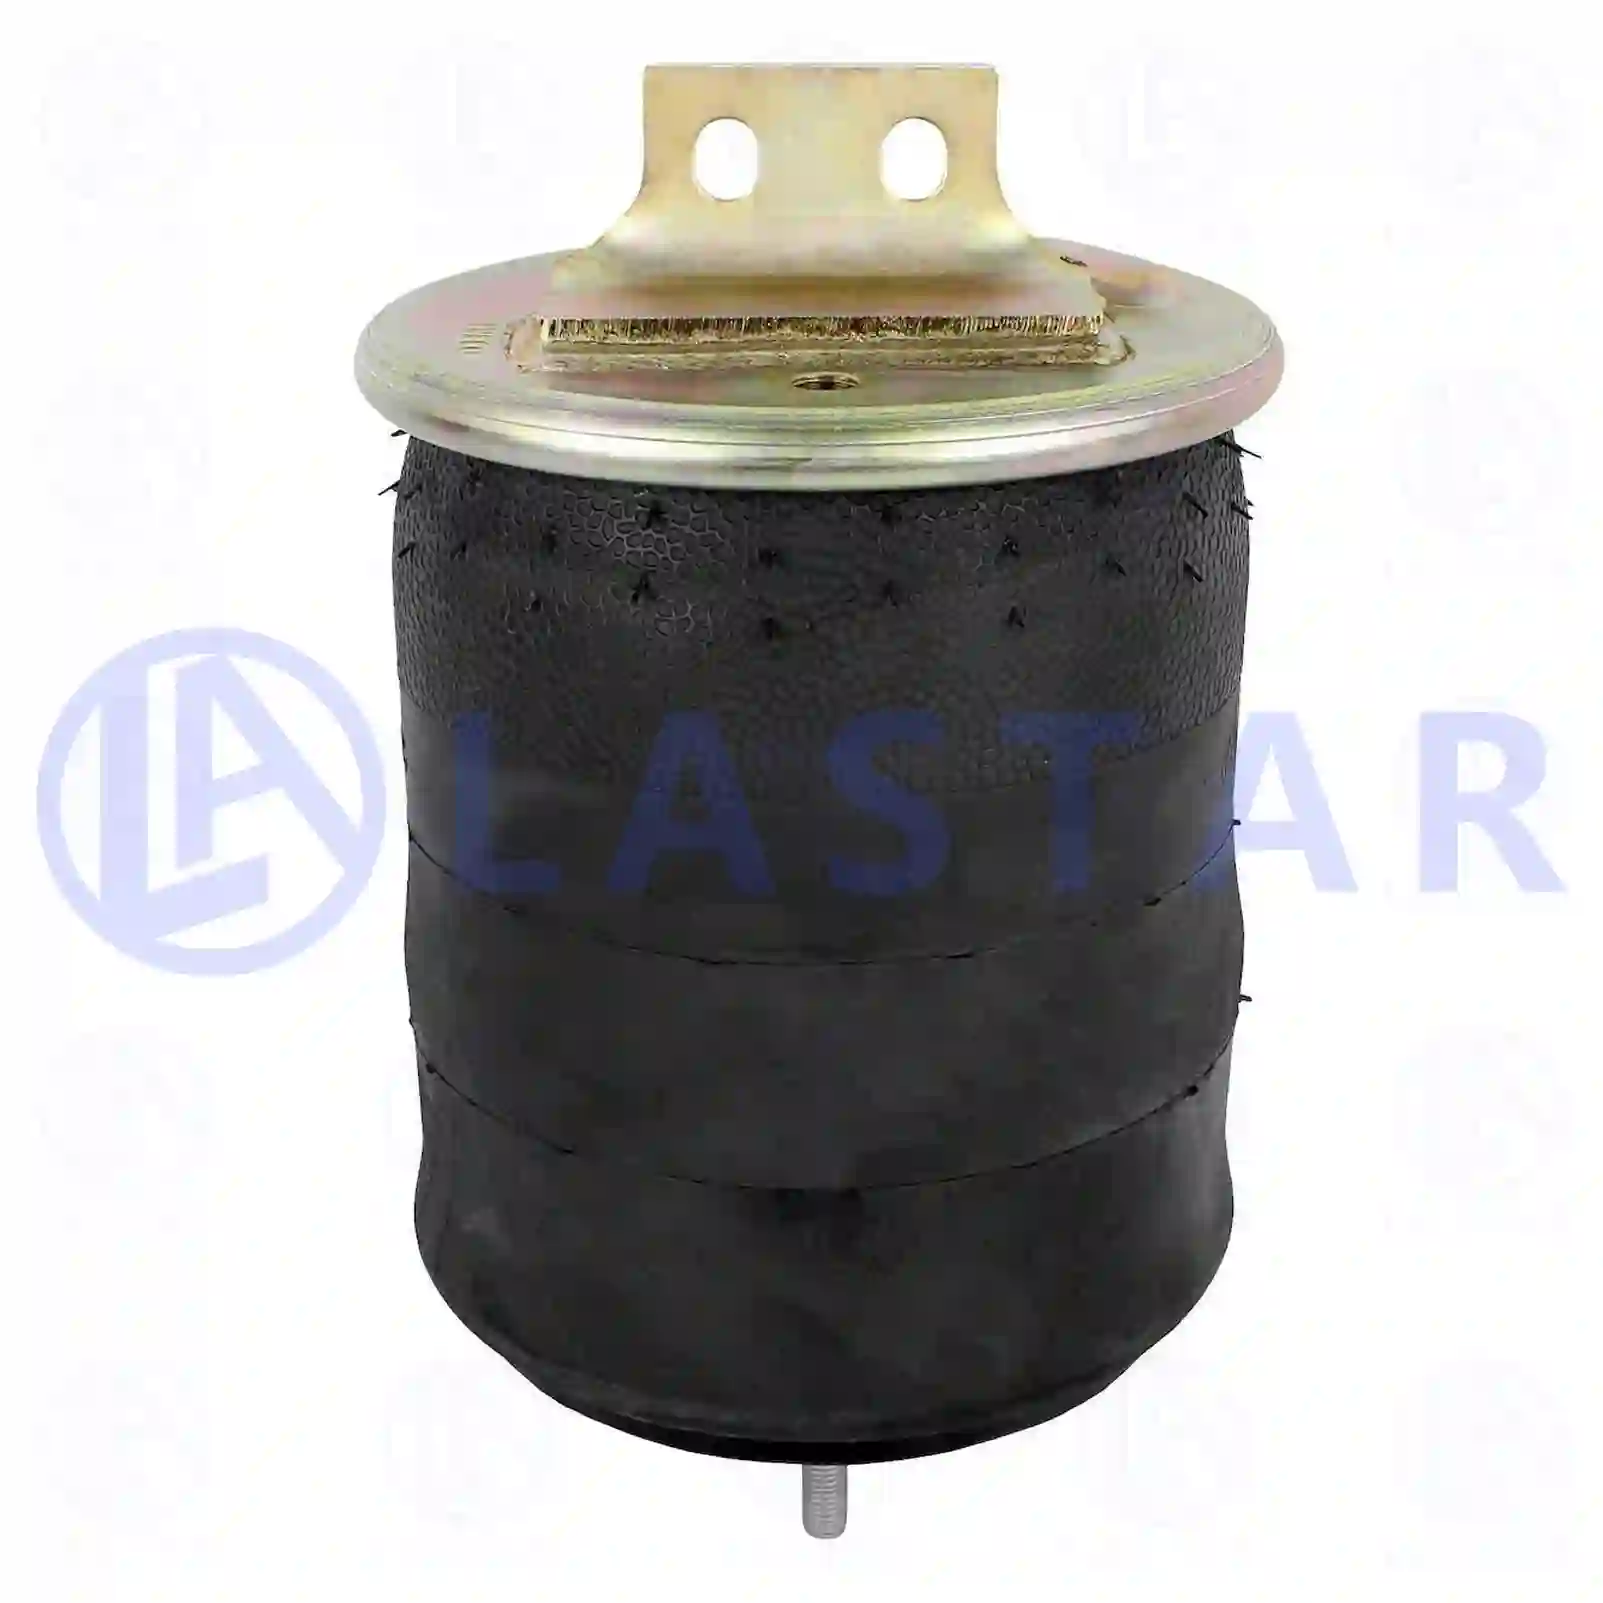 Air spring, with plastic piston, 77729288, 41270462, , ||  77729288 Lastar Spare Part | Truck Spare Parts, Auotomotive Spare Parts Air spring, with plastic piston, 77729288, 41270462, , ||  77729288 Lastar Spare Part | Truck Spare Parts, Auotomotive Spare Parts